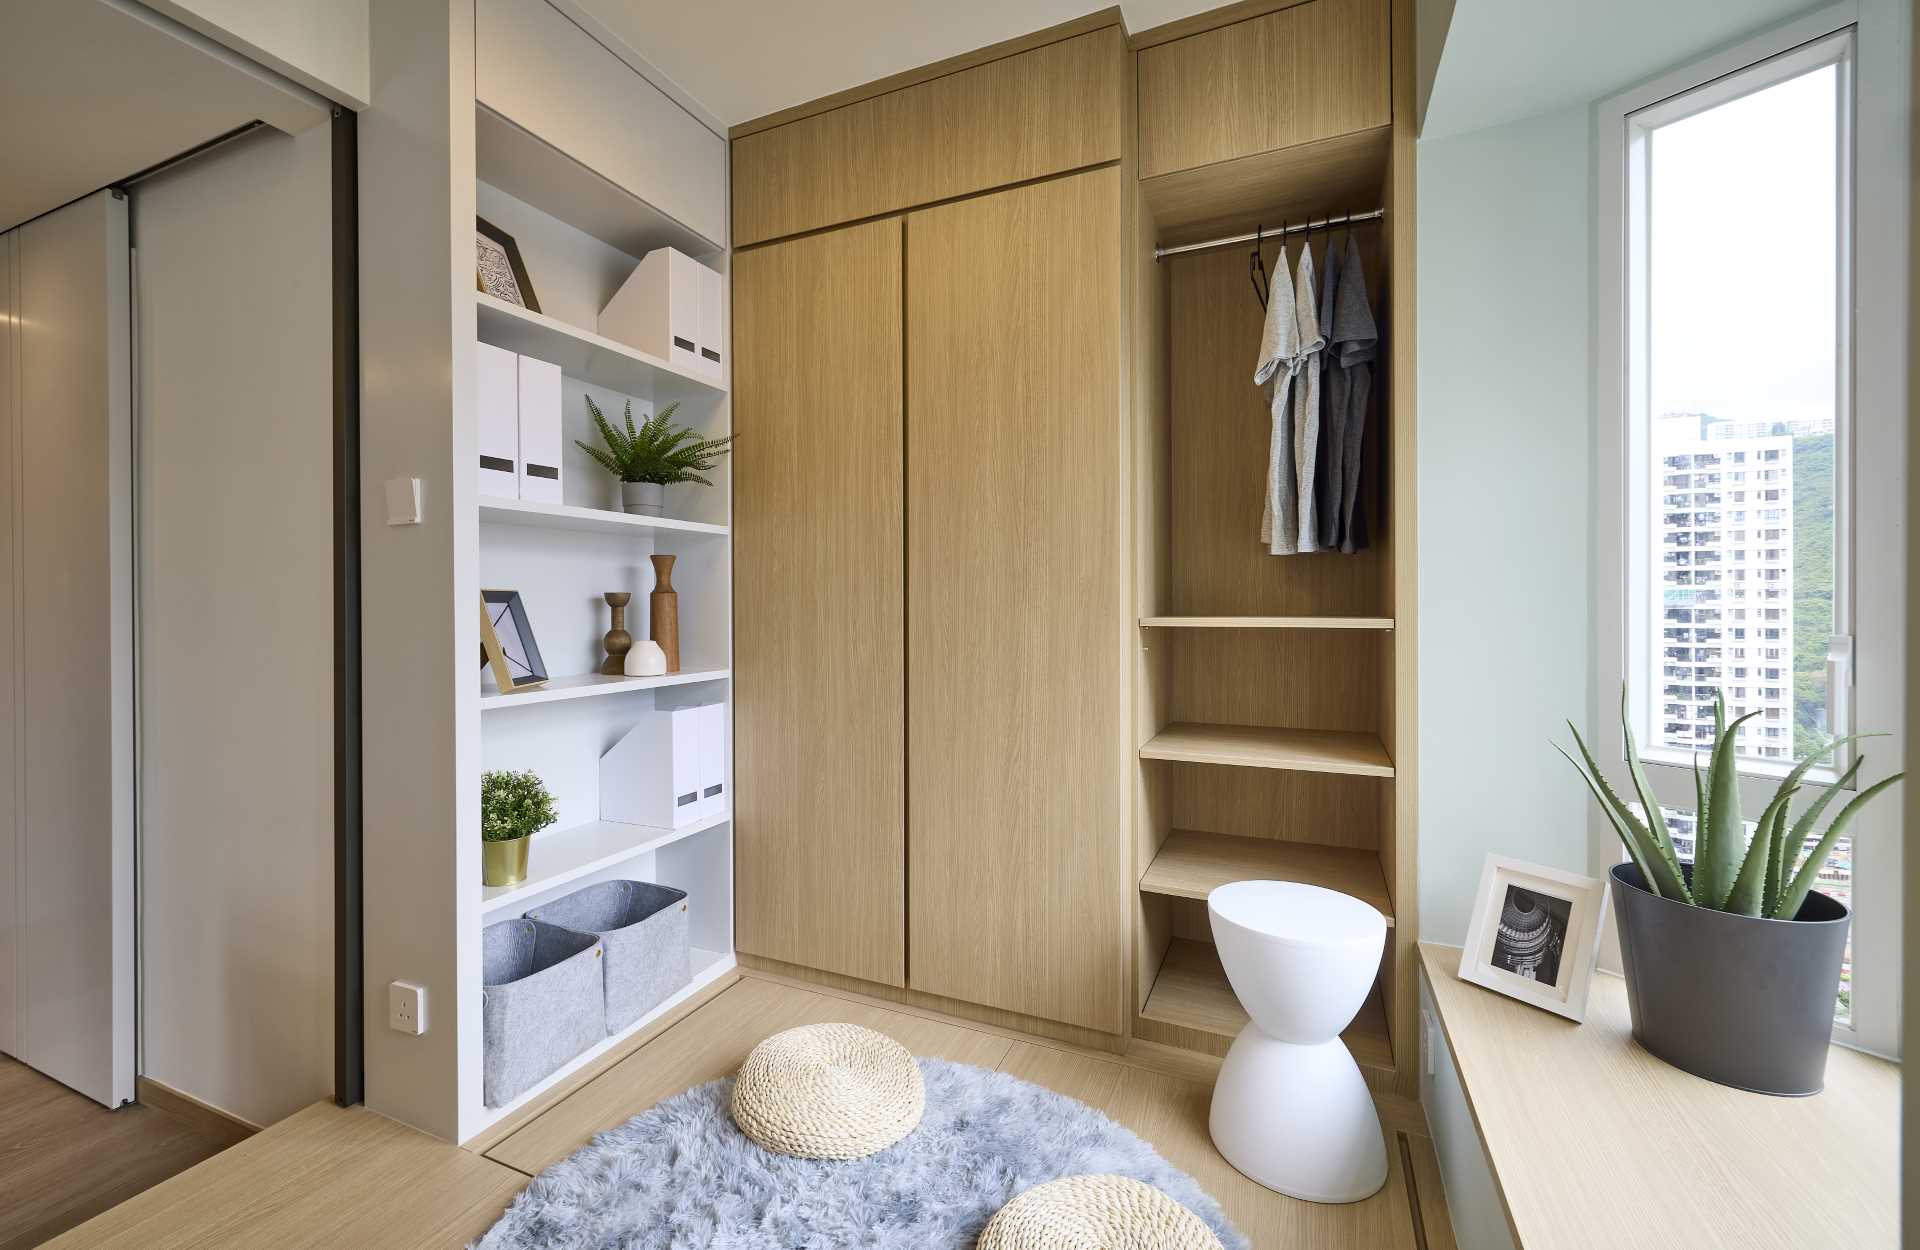 A wood closet and white bookshelf in a small apartment makes the most of the available space.